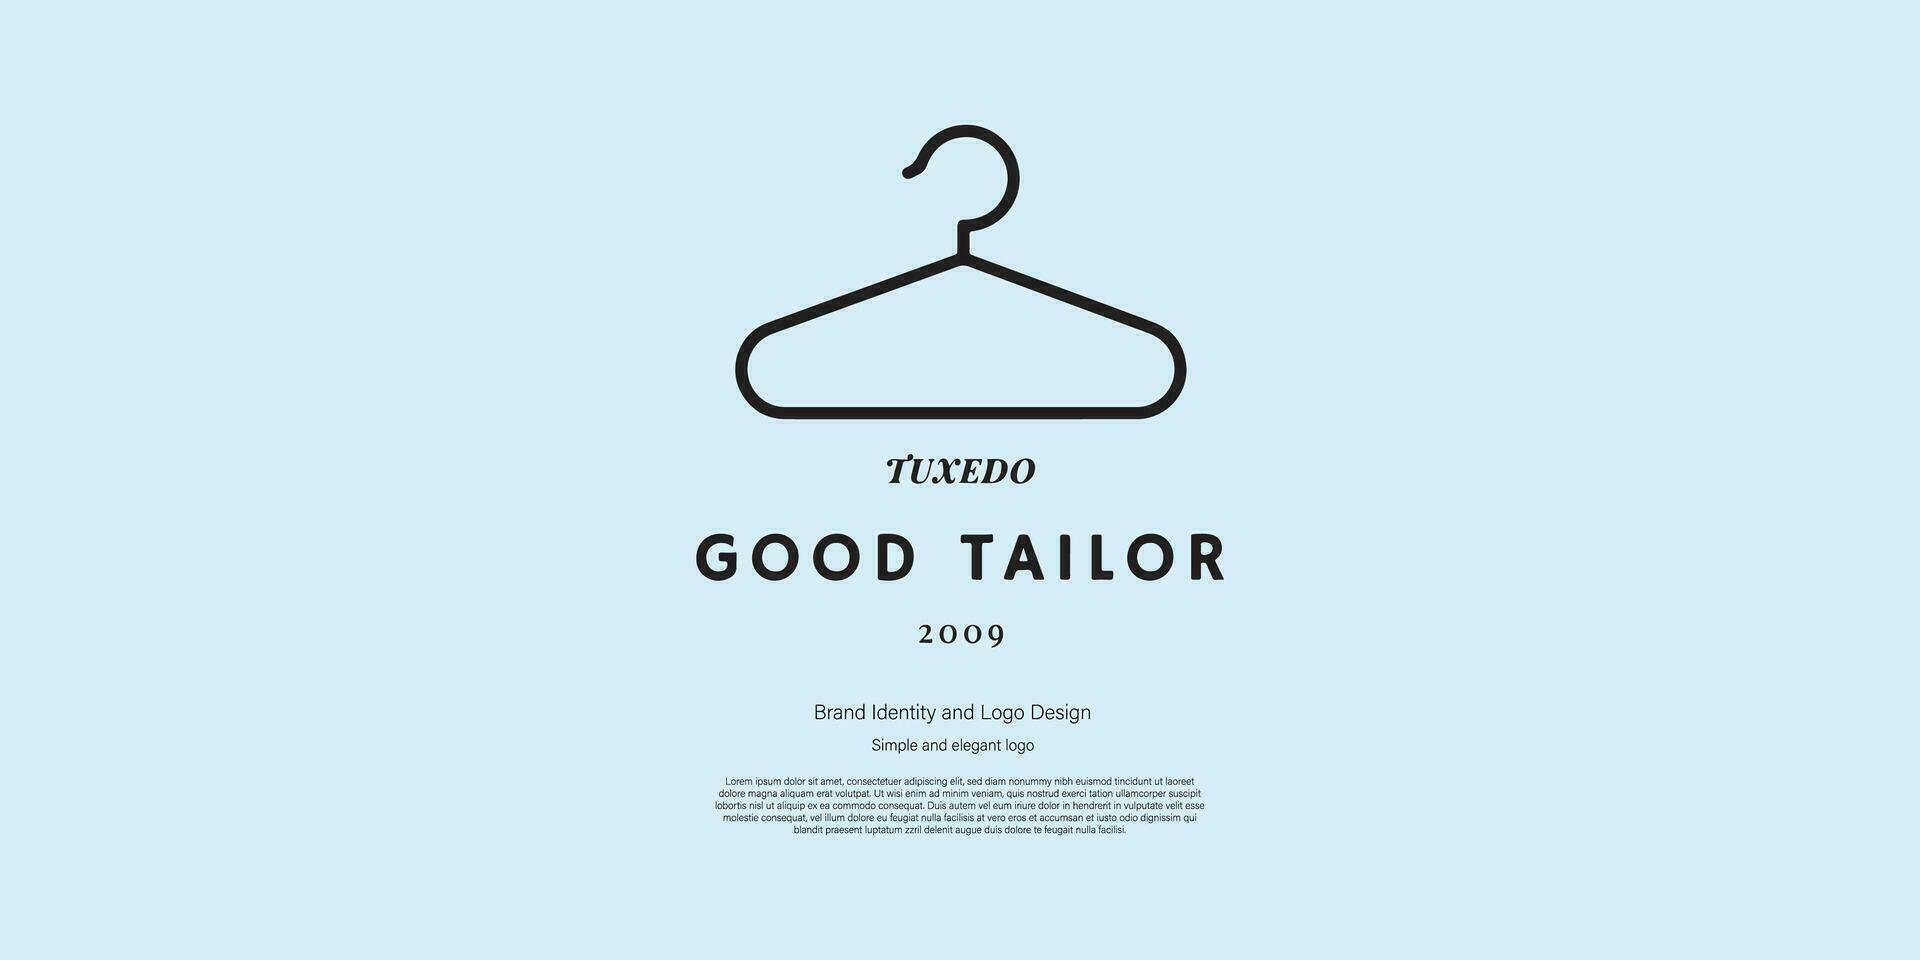 tailor logo design for branding and shop identity, free commercial use vector